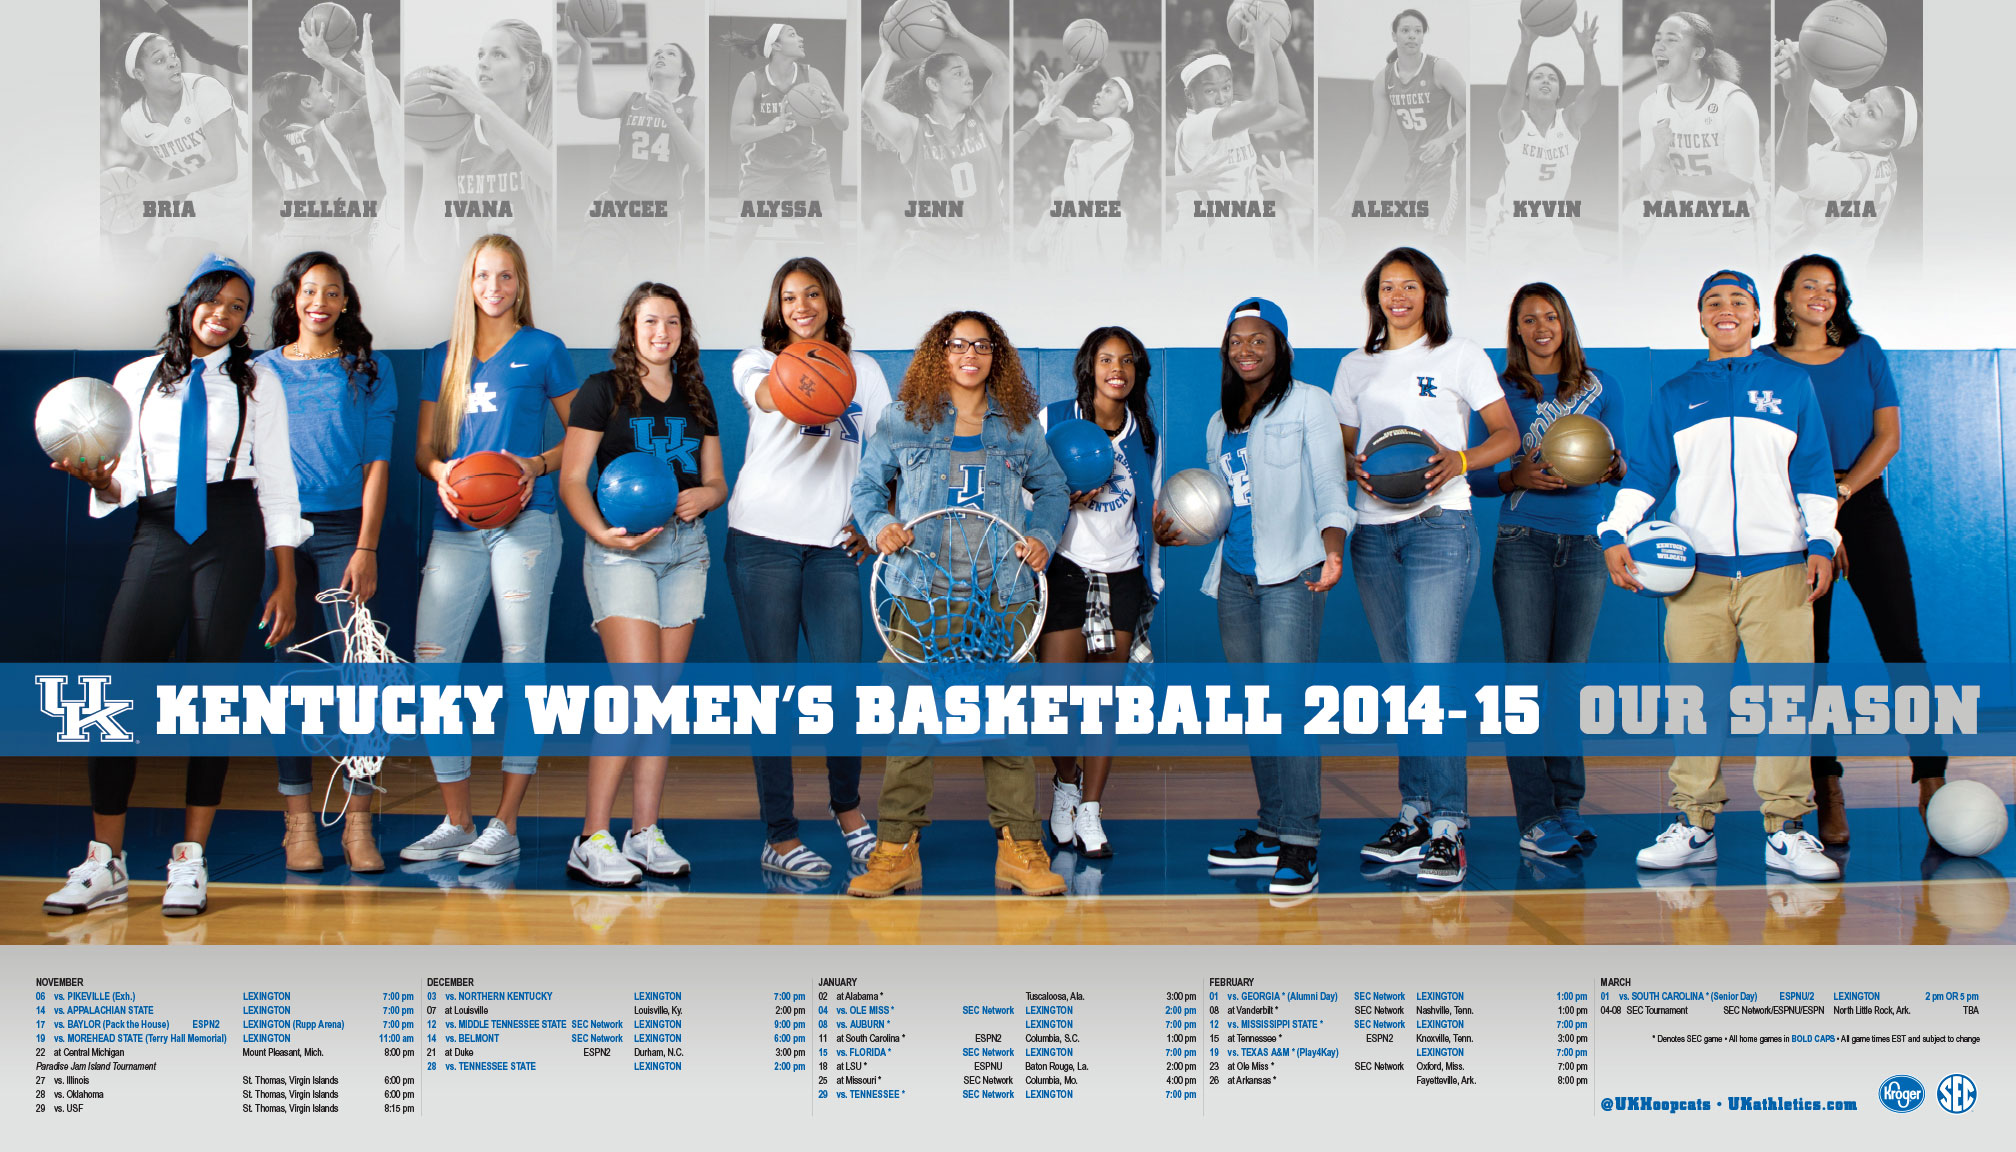 2014-15 PosterSwag.com Top-50 Women’s Basketball Schedule Posters | Poster Swag2016 x 1152